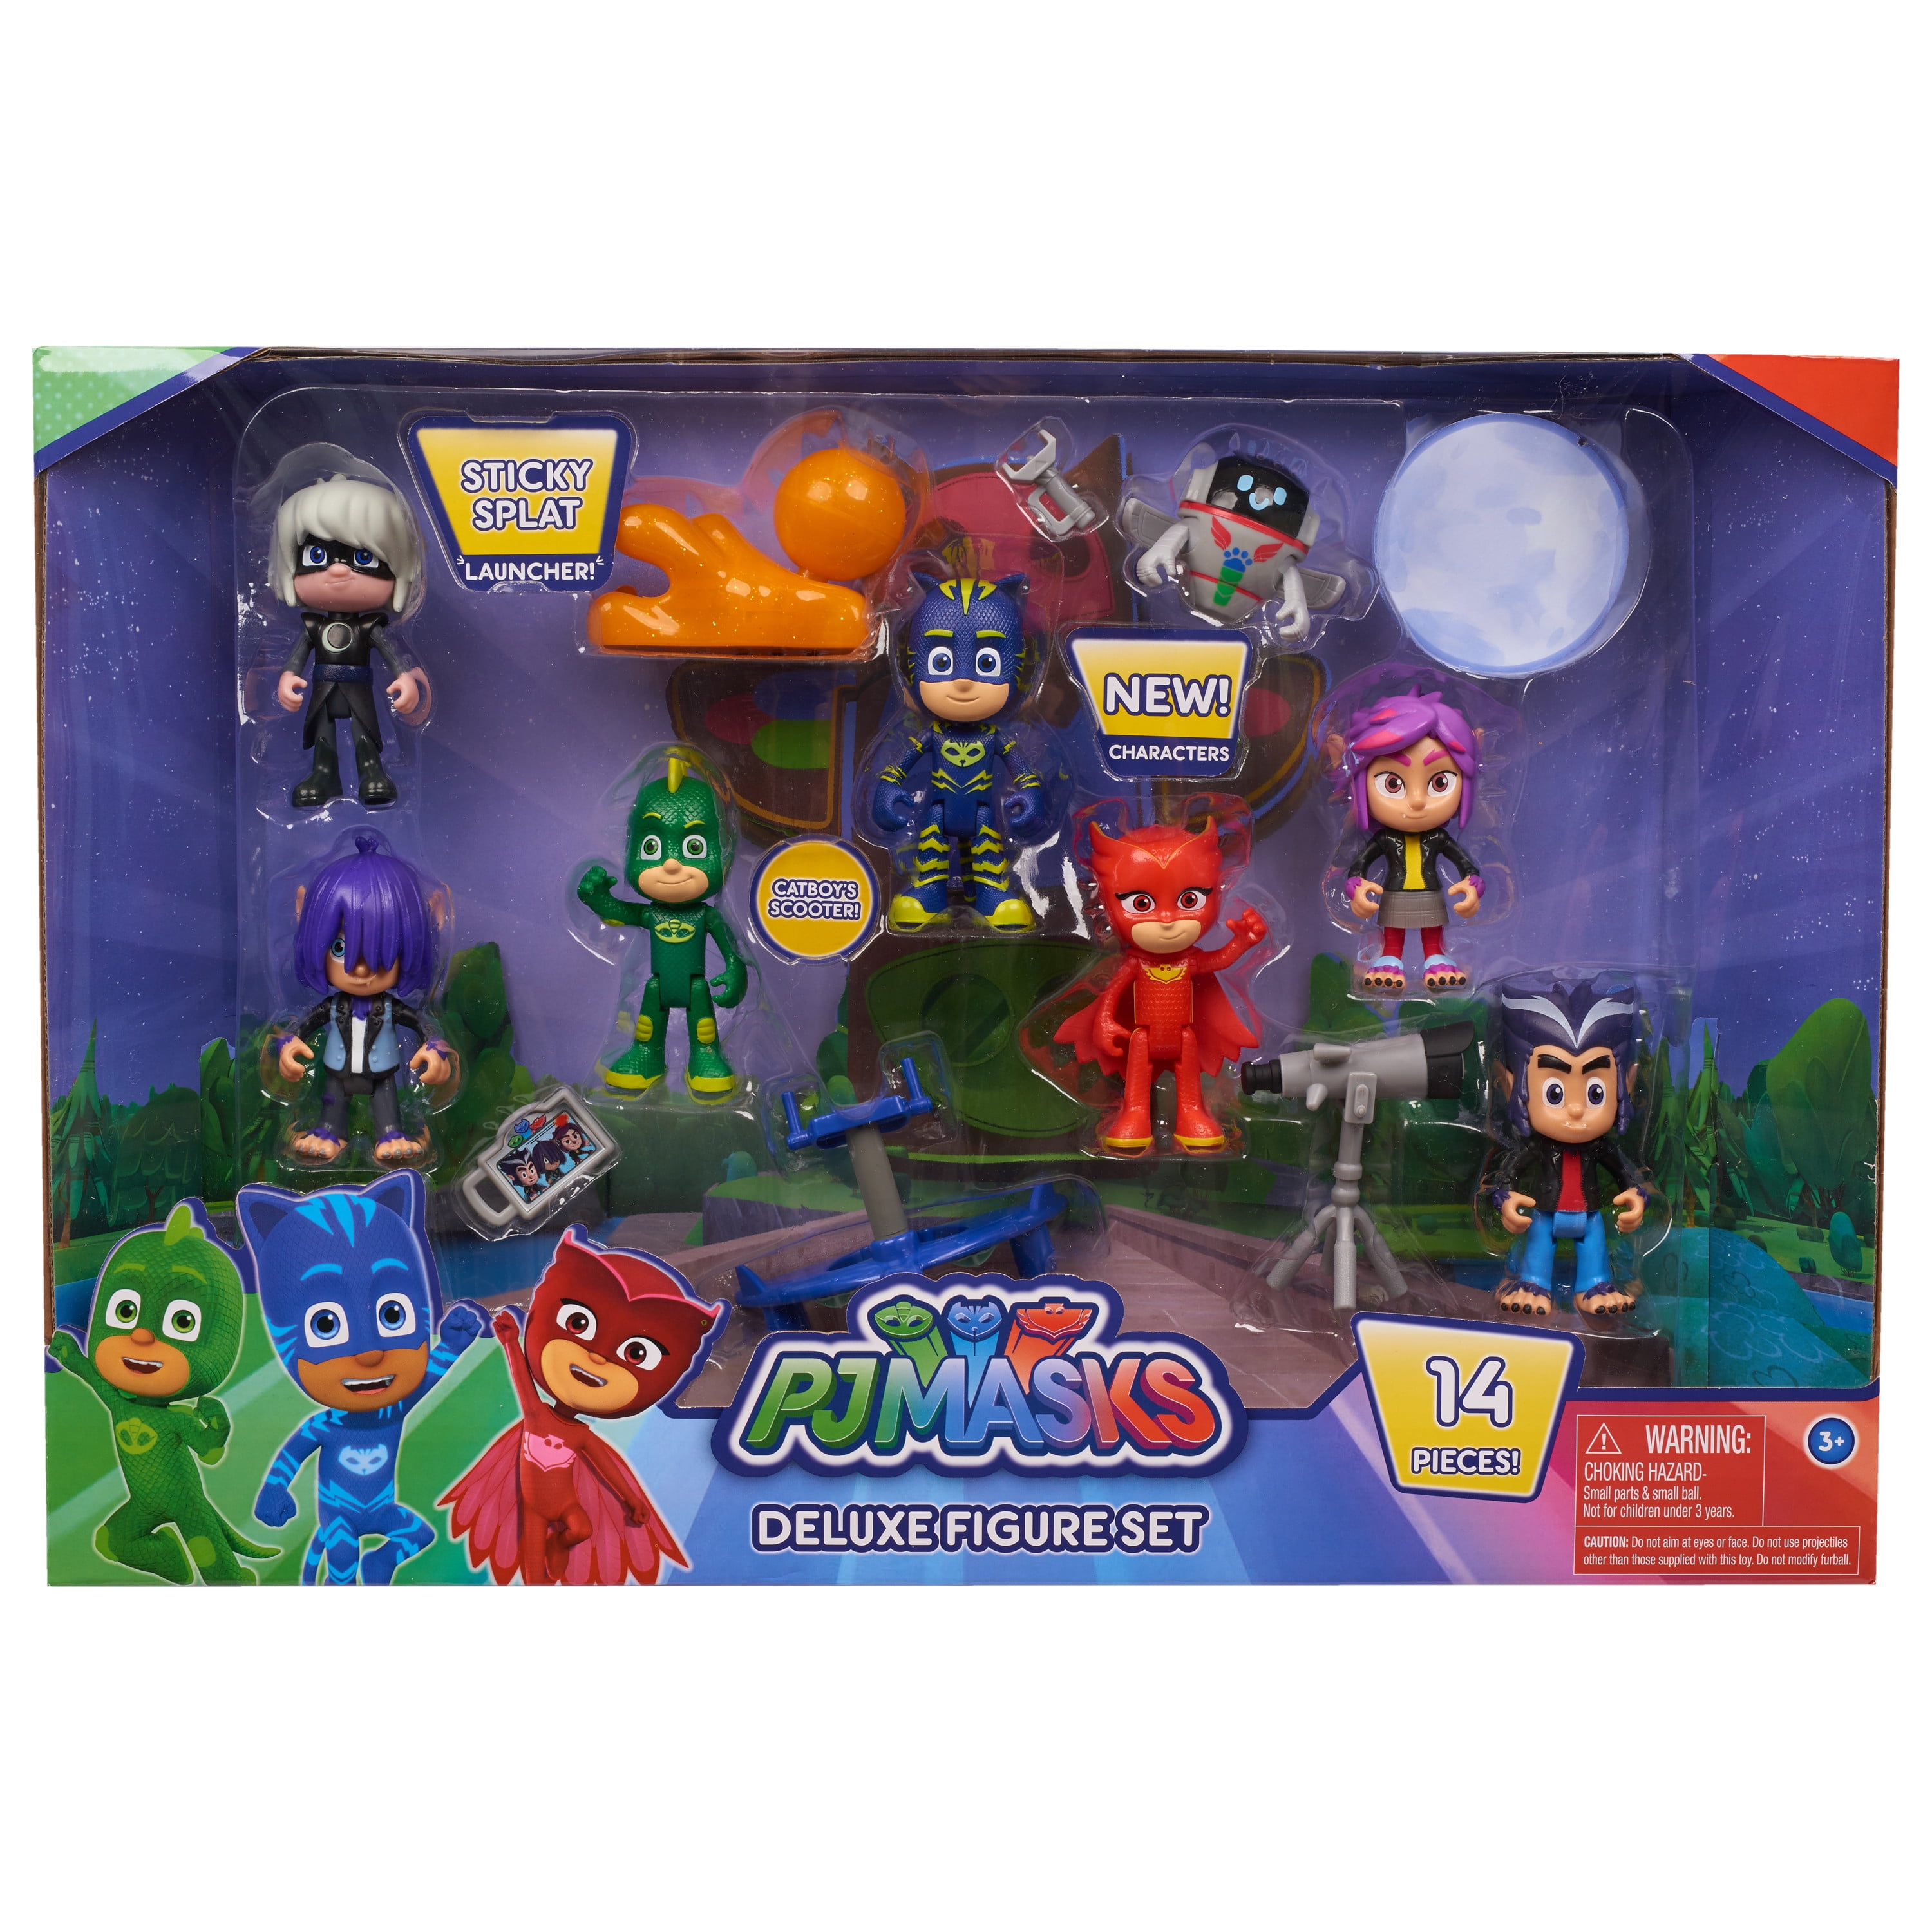 PJ Masks Deluxe Figure Set, 17 Pieces for PJ Masks Toys and Playsets, Kids  Toys for Ages 3 Up, Gifts and Presents